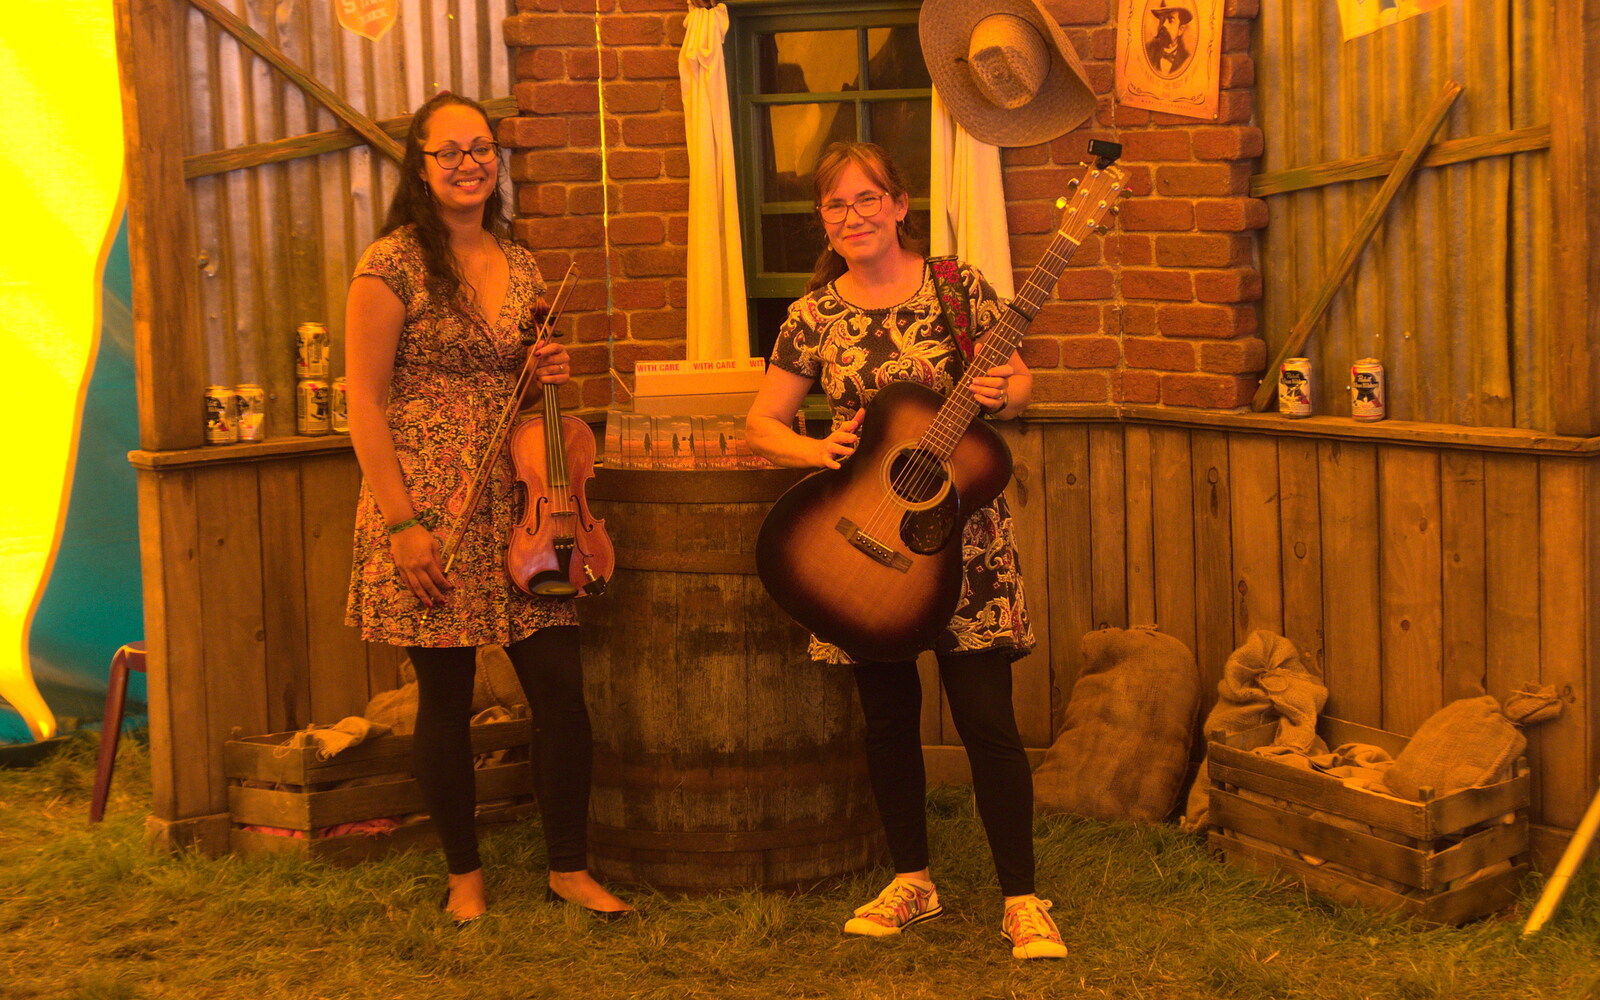 A band photo of the Rye Sisters from Maui Waui Festival, Hill Farm, Gressenhall, Norfolk - 28th August 2021